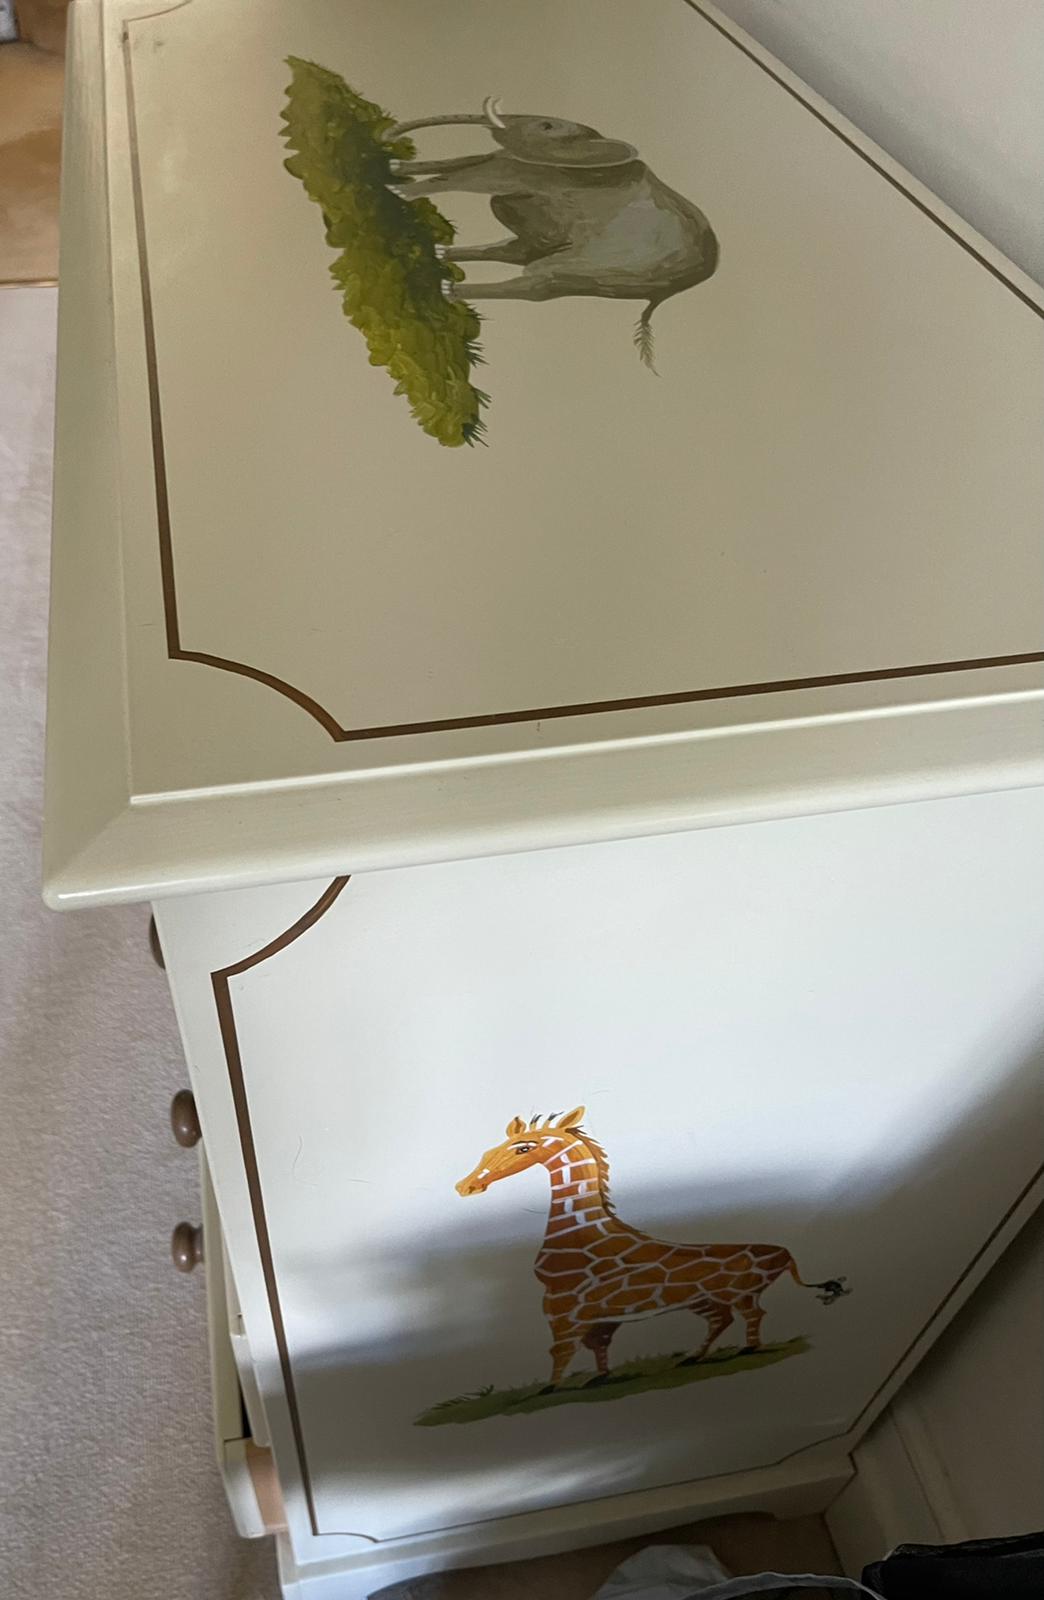 Dragons of Walton Street Classic Large Chest of Drawers Hand Painted Vintage Safari 85 cm x 45 cm - Image 3 of 3